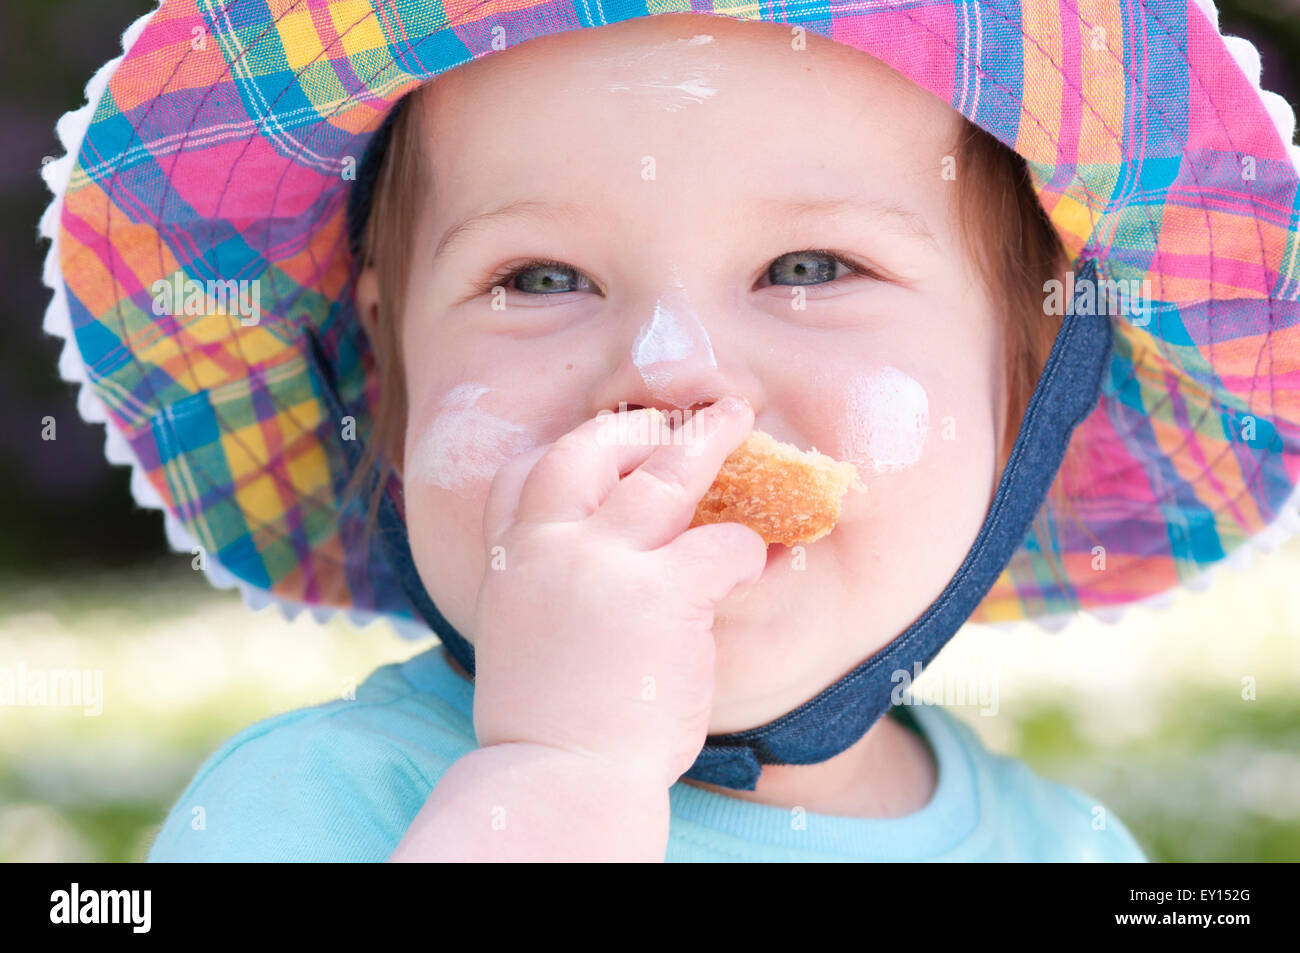 Portrait of a little girl wearing a sun hat eating bread with sun cream on her face Stock Photo